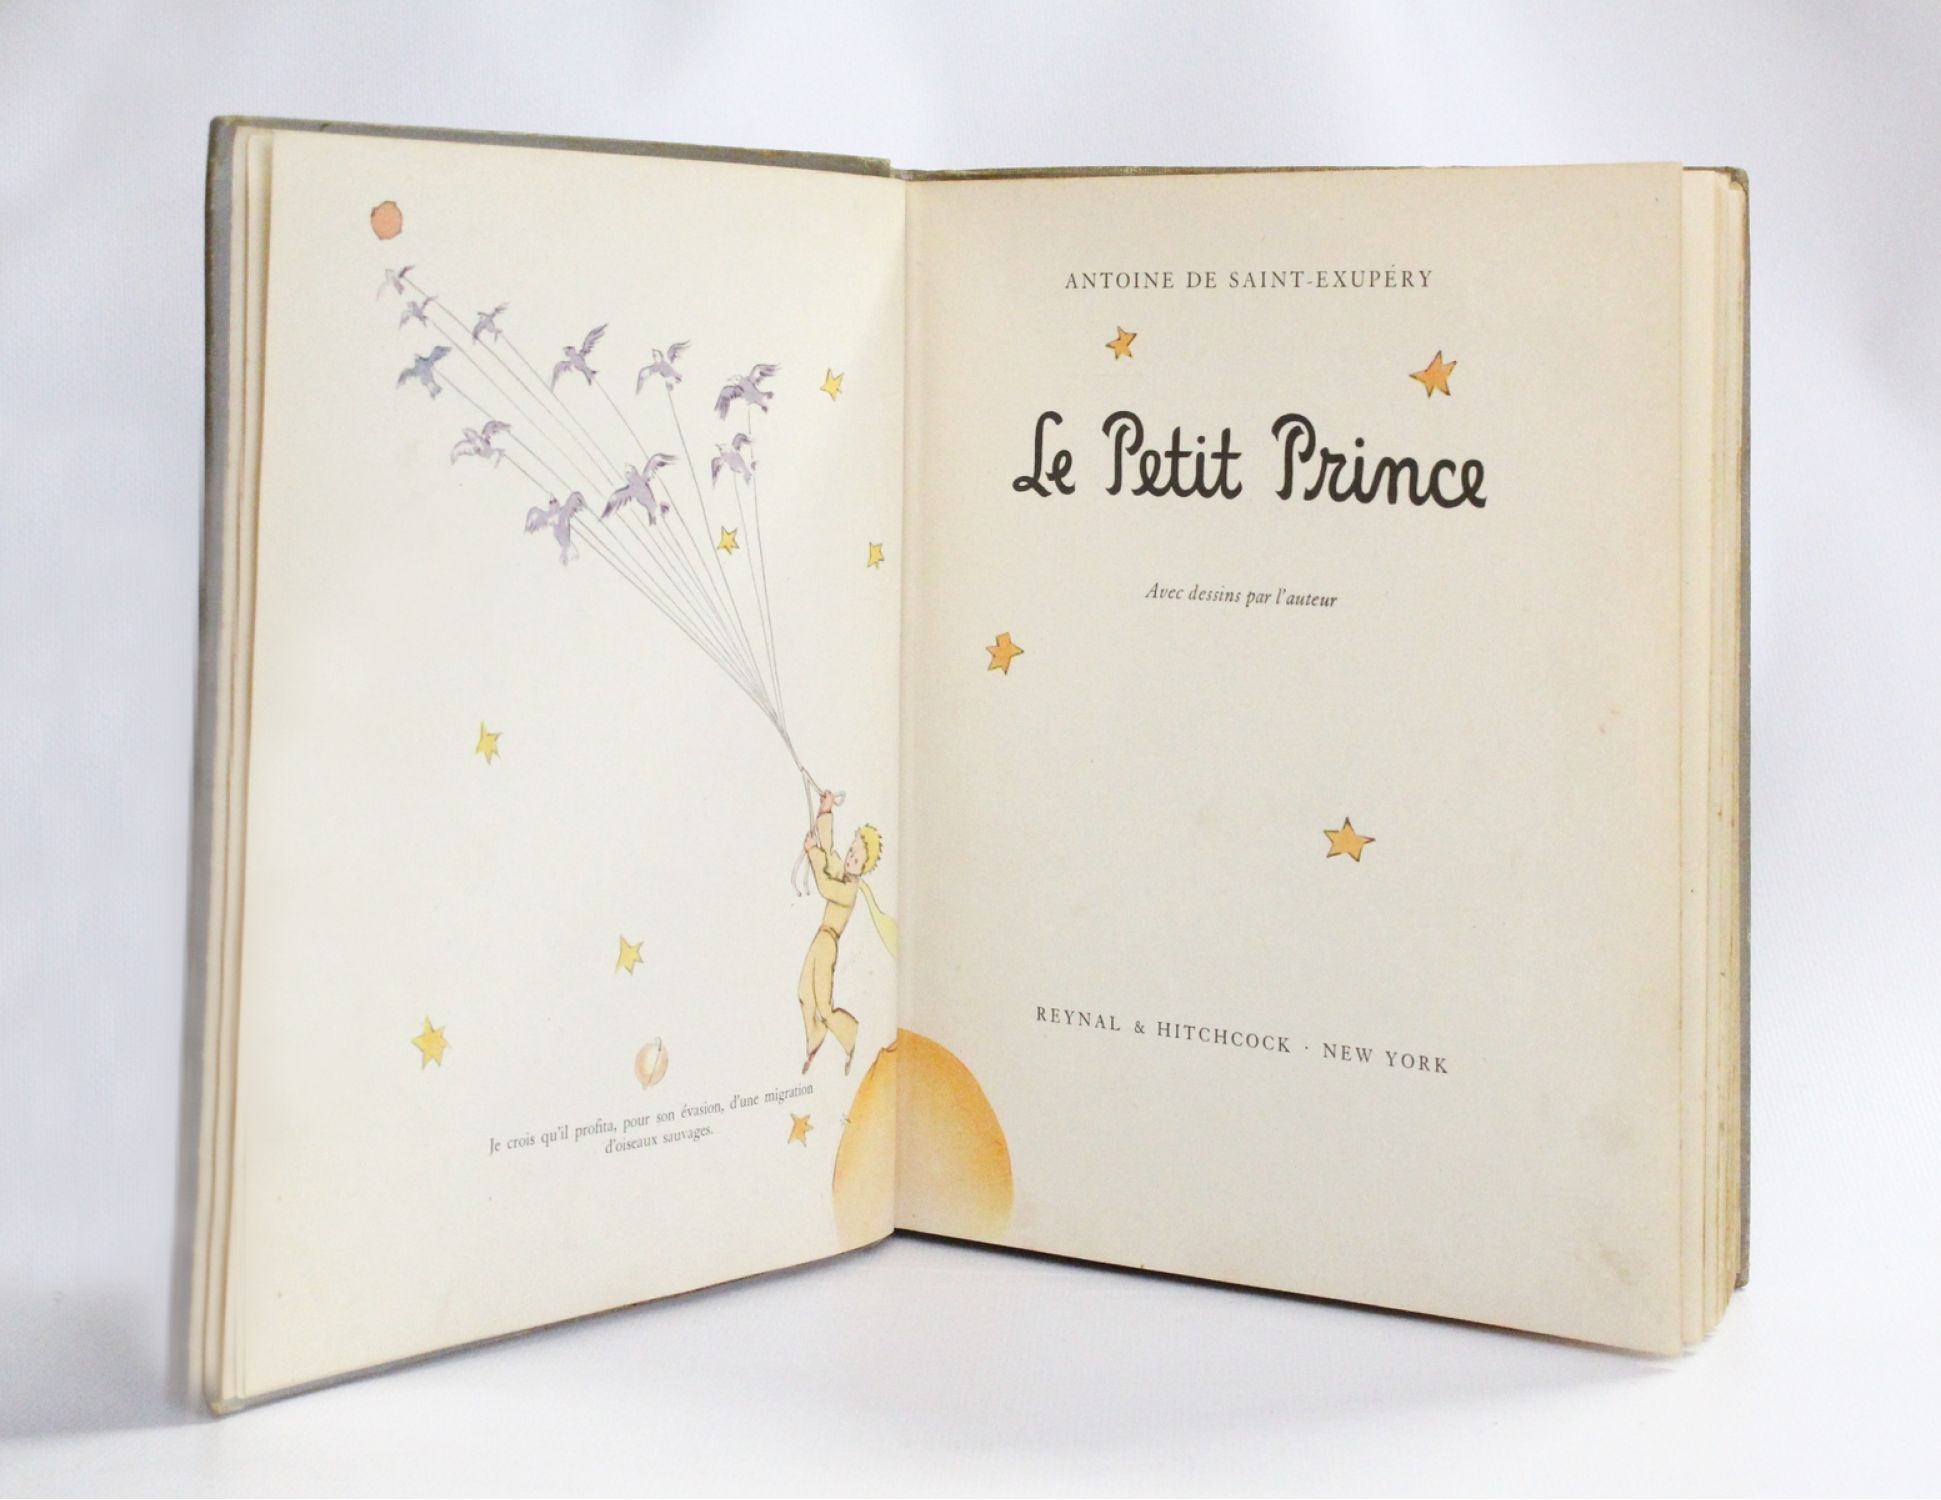 SAINT-EXUPERY : Le petit prince - Signed book, First edition